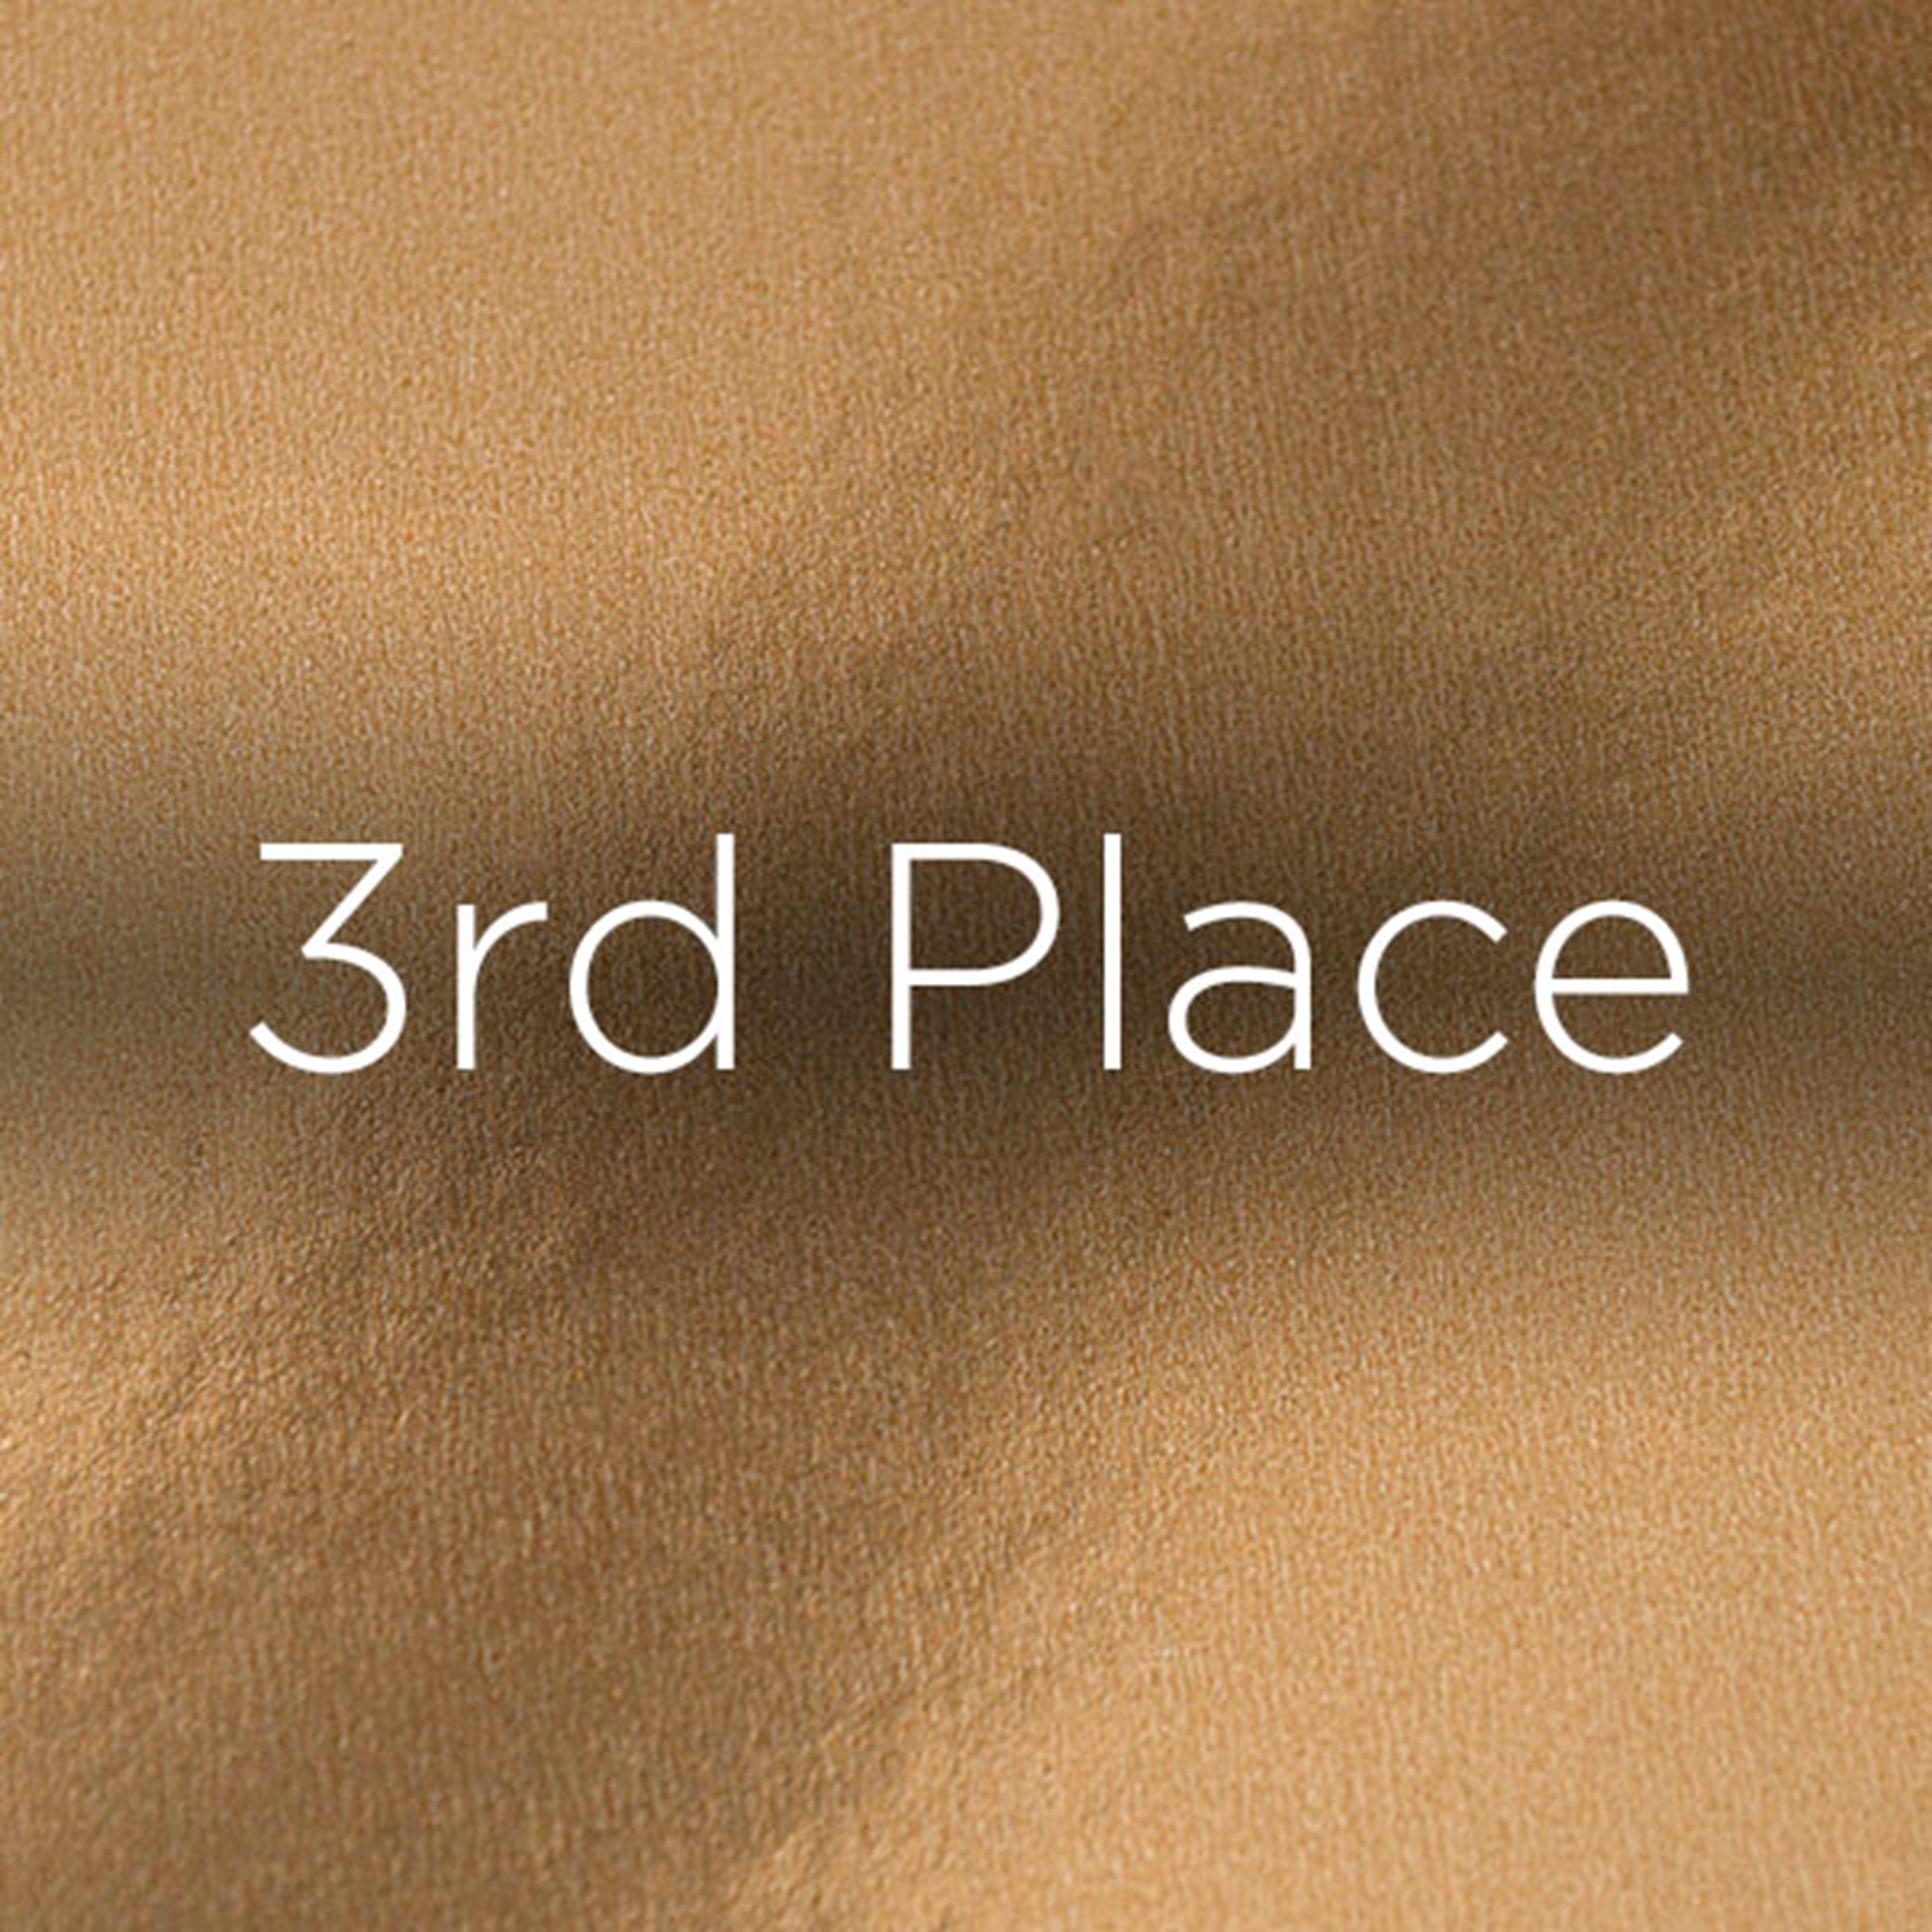 Third place text on bronze background